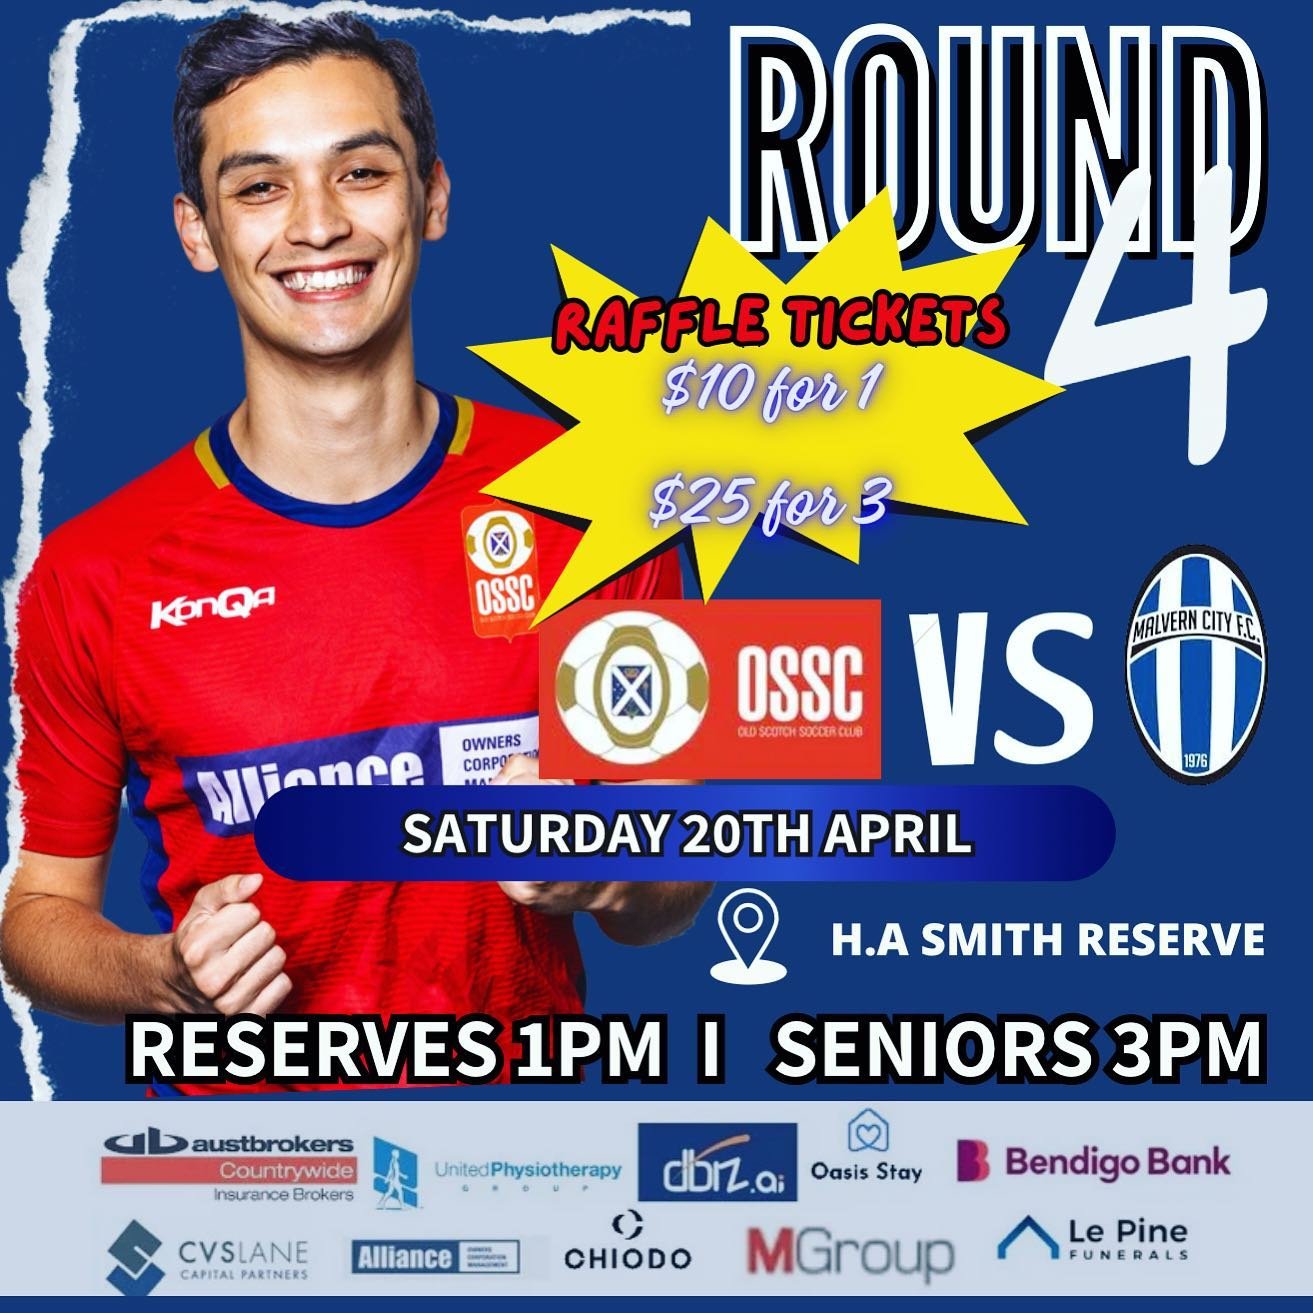 Massive game this Saturday with a local derby against our neighbours over the creek! 

Get down to support the lads! 

🎫 A raffle will be held with prizes to be won! 
⏰Reserves 1pm I Seniors 3pm 
📍 H.A Smith Reserve